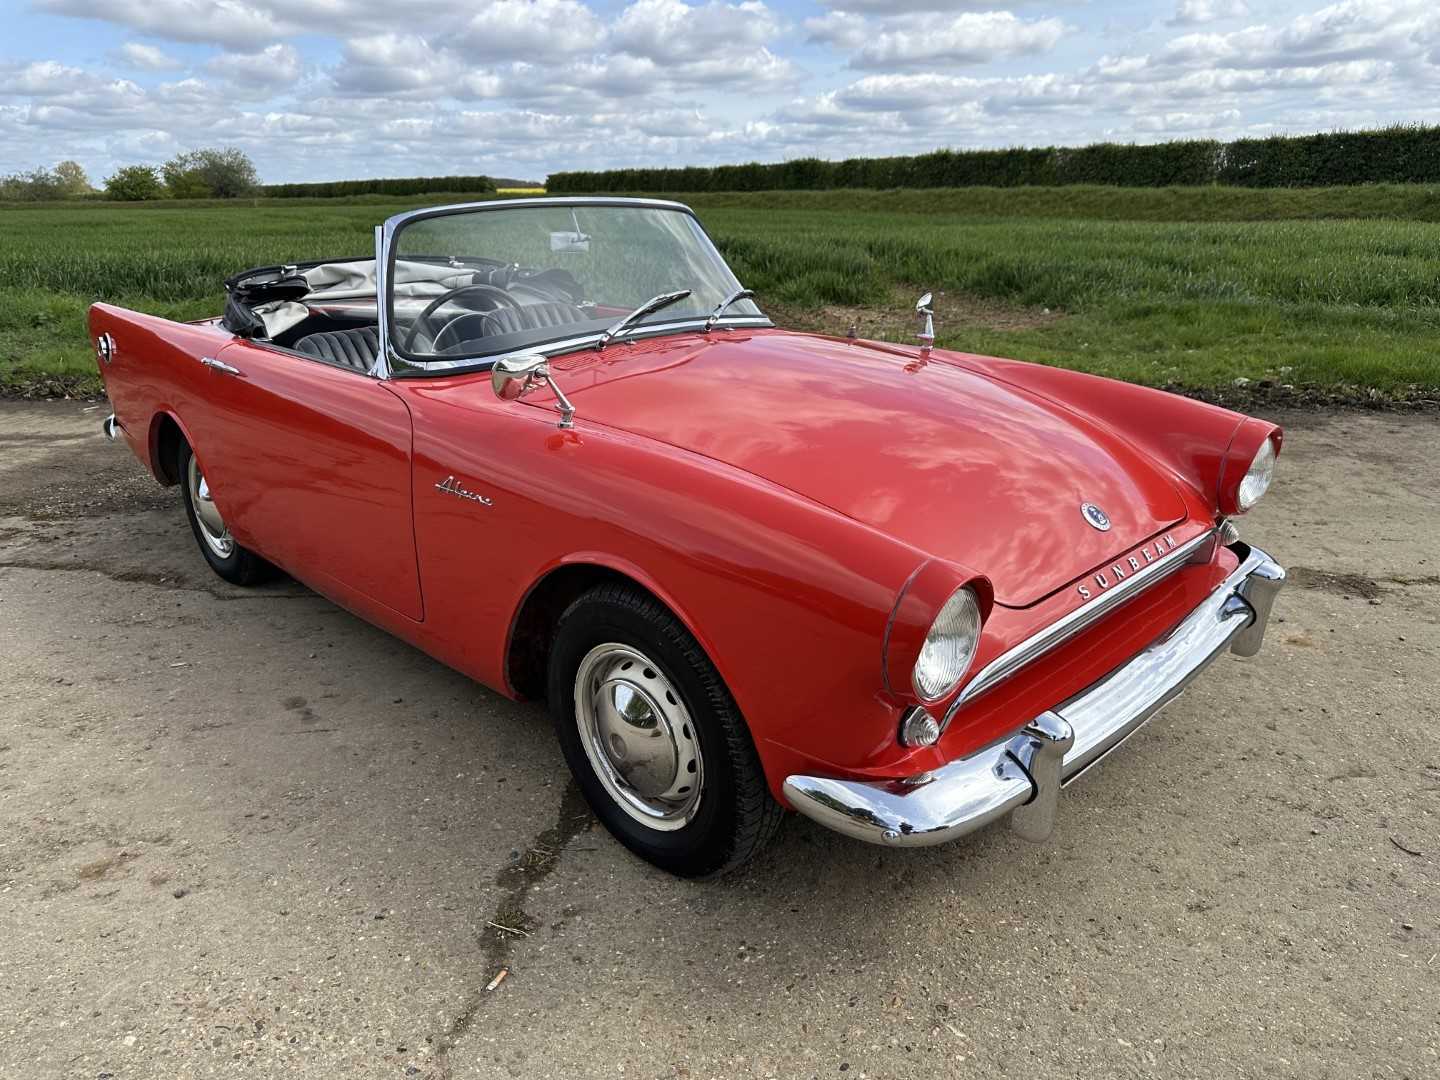 1960 Sunbeam Alpine sports convertible, 1600cc engine, manual gearbox with overdrive, reg. no. 3685 - Image 2 of 30